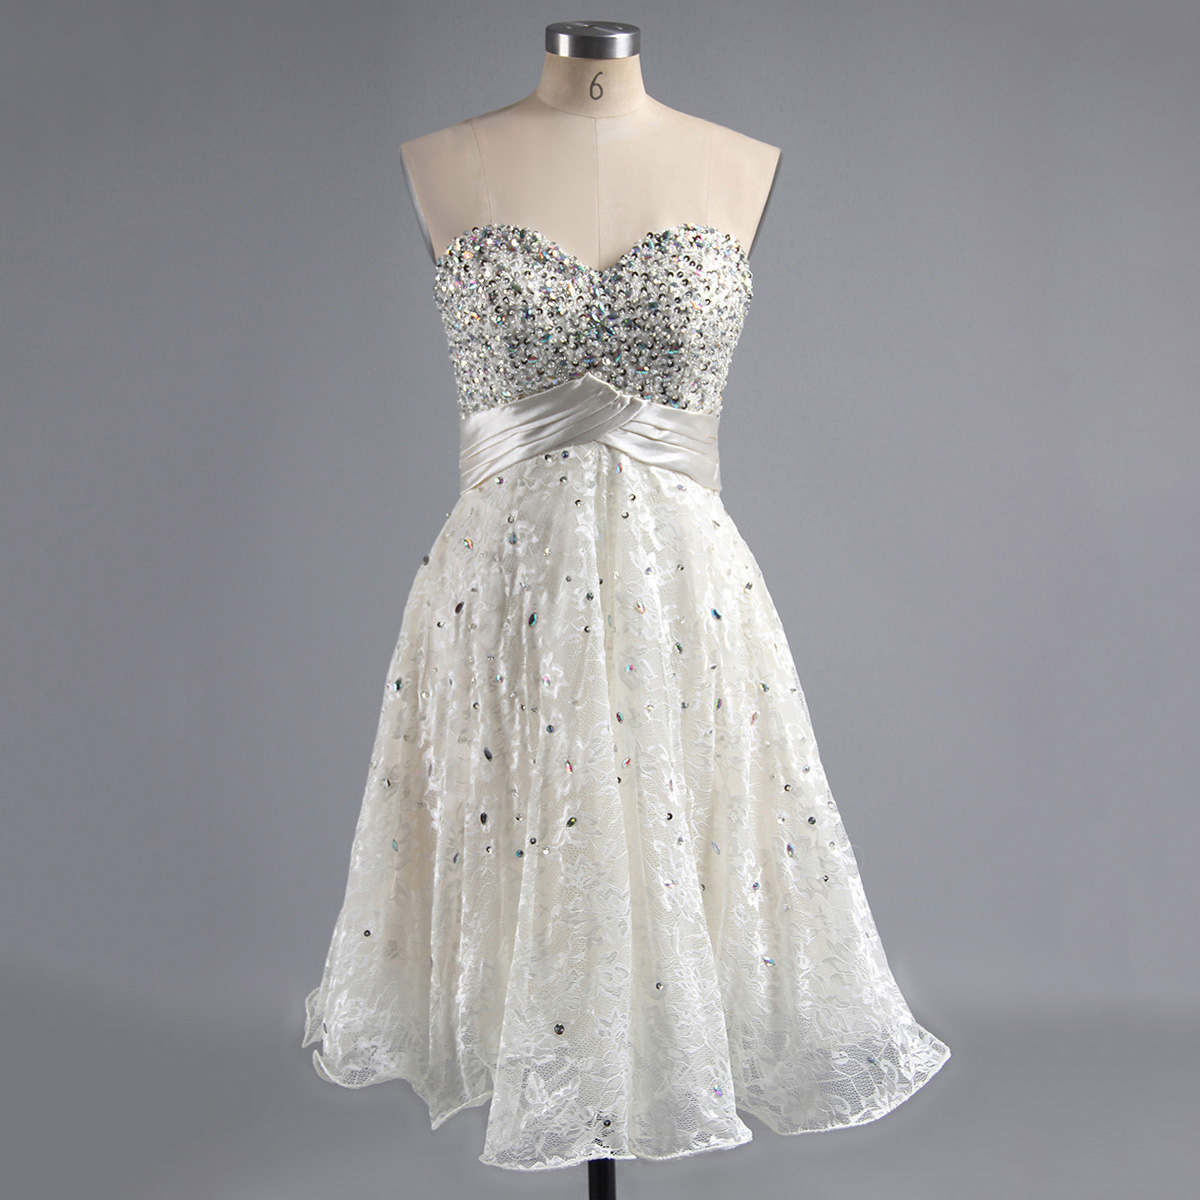 Sweetheart White And Silver Homecoming Dress, Elegant Lace Homecoming Dress With Beads And Sequins, Lace-up Mini Homecoming Dress